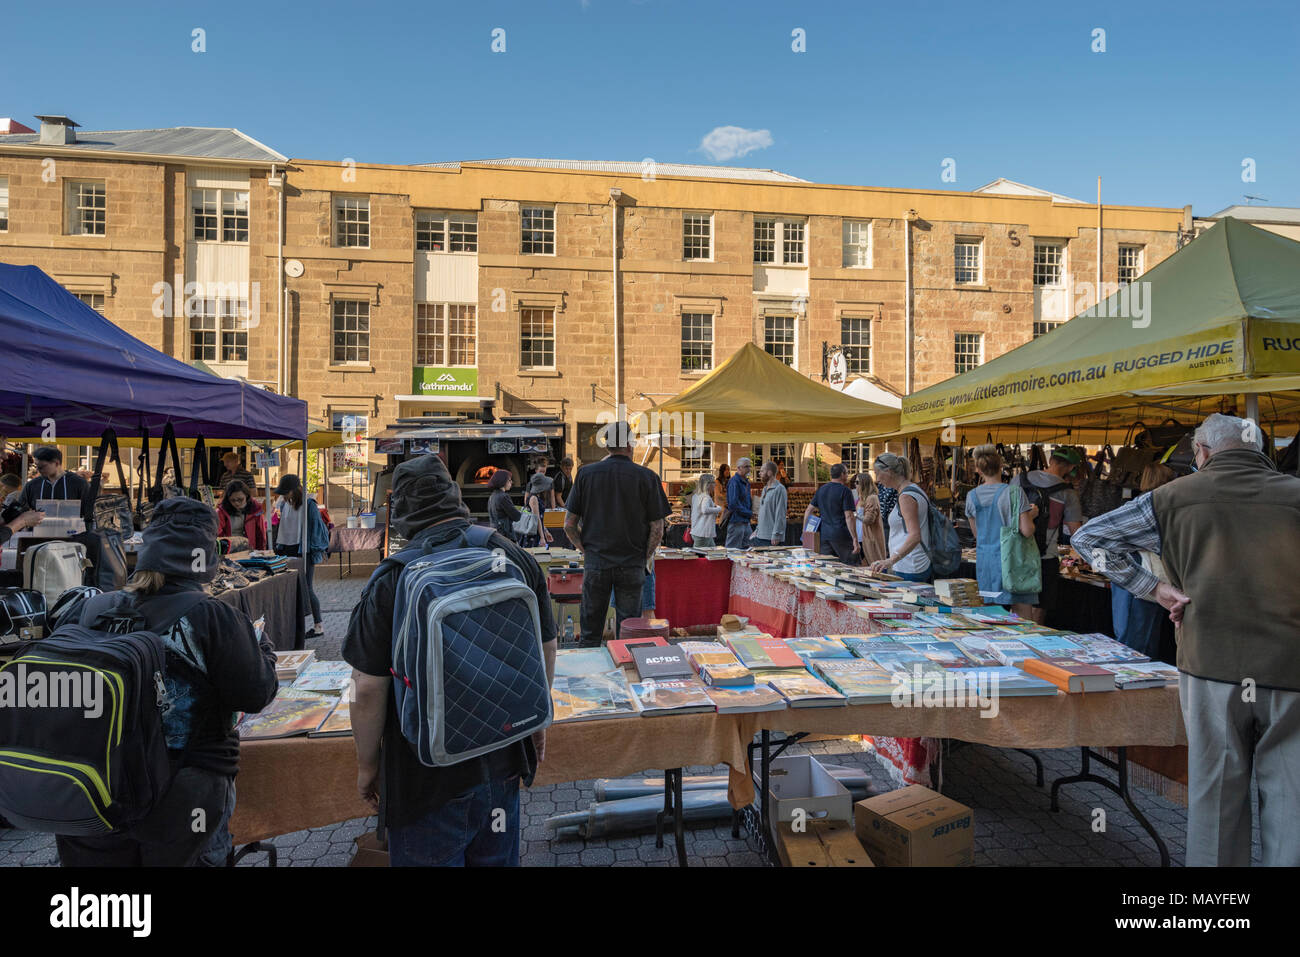 Salamanca Market with stalls in front of the old waterfront sandstone buildings in Hobart, Tasmania Stock Photo